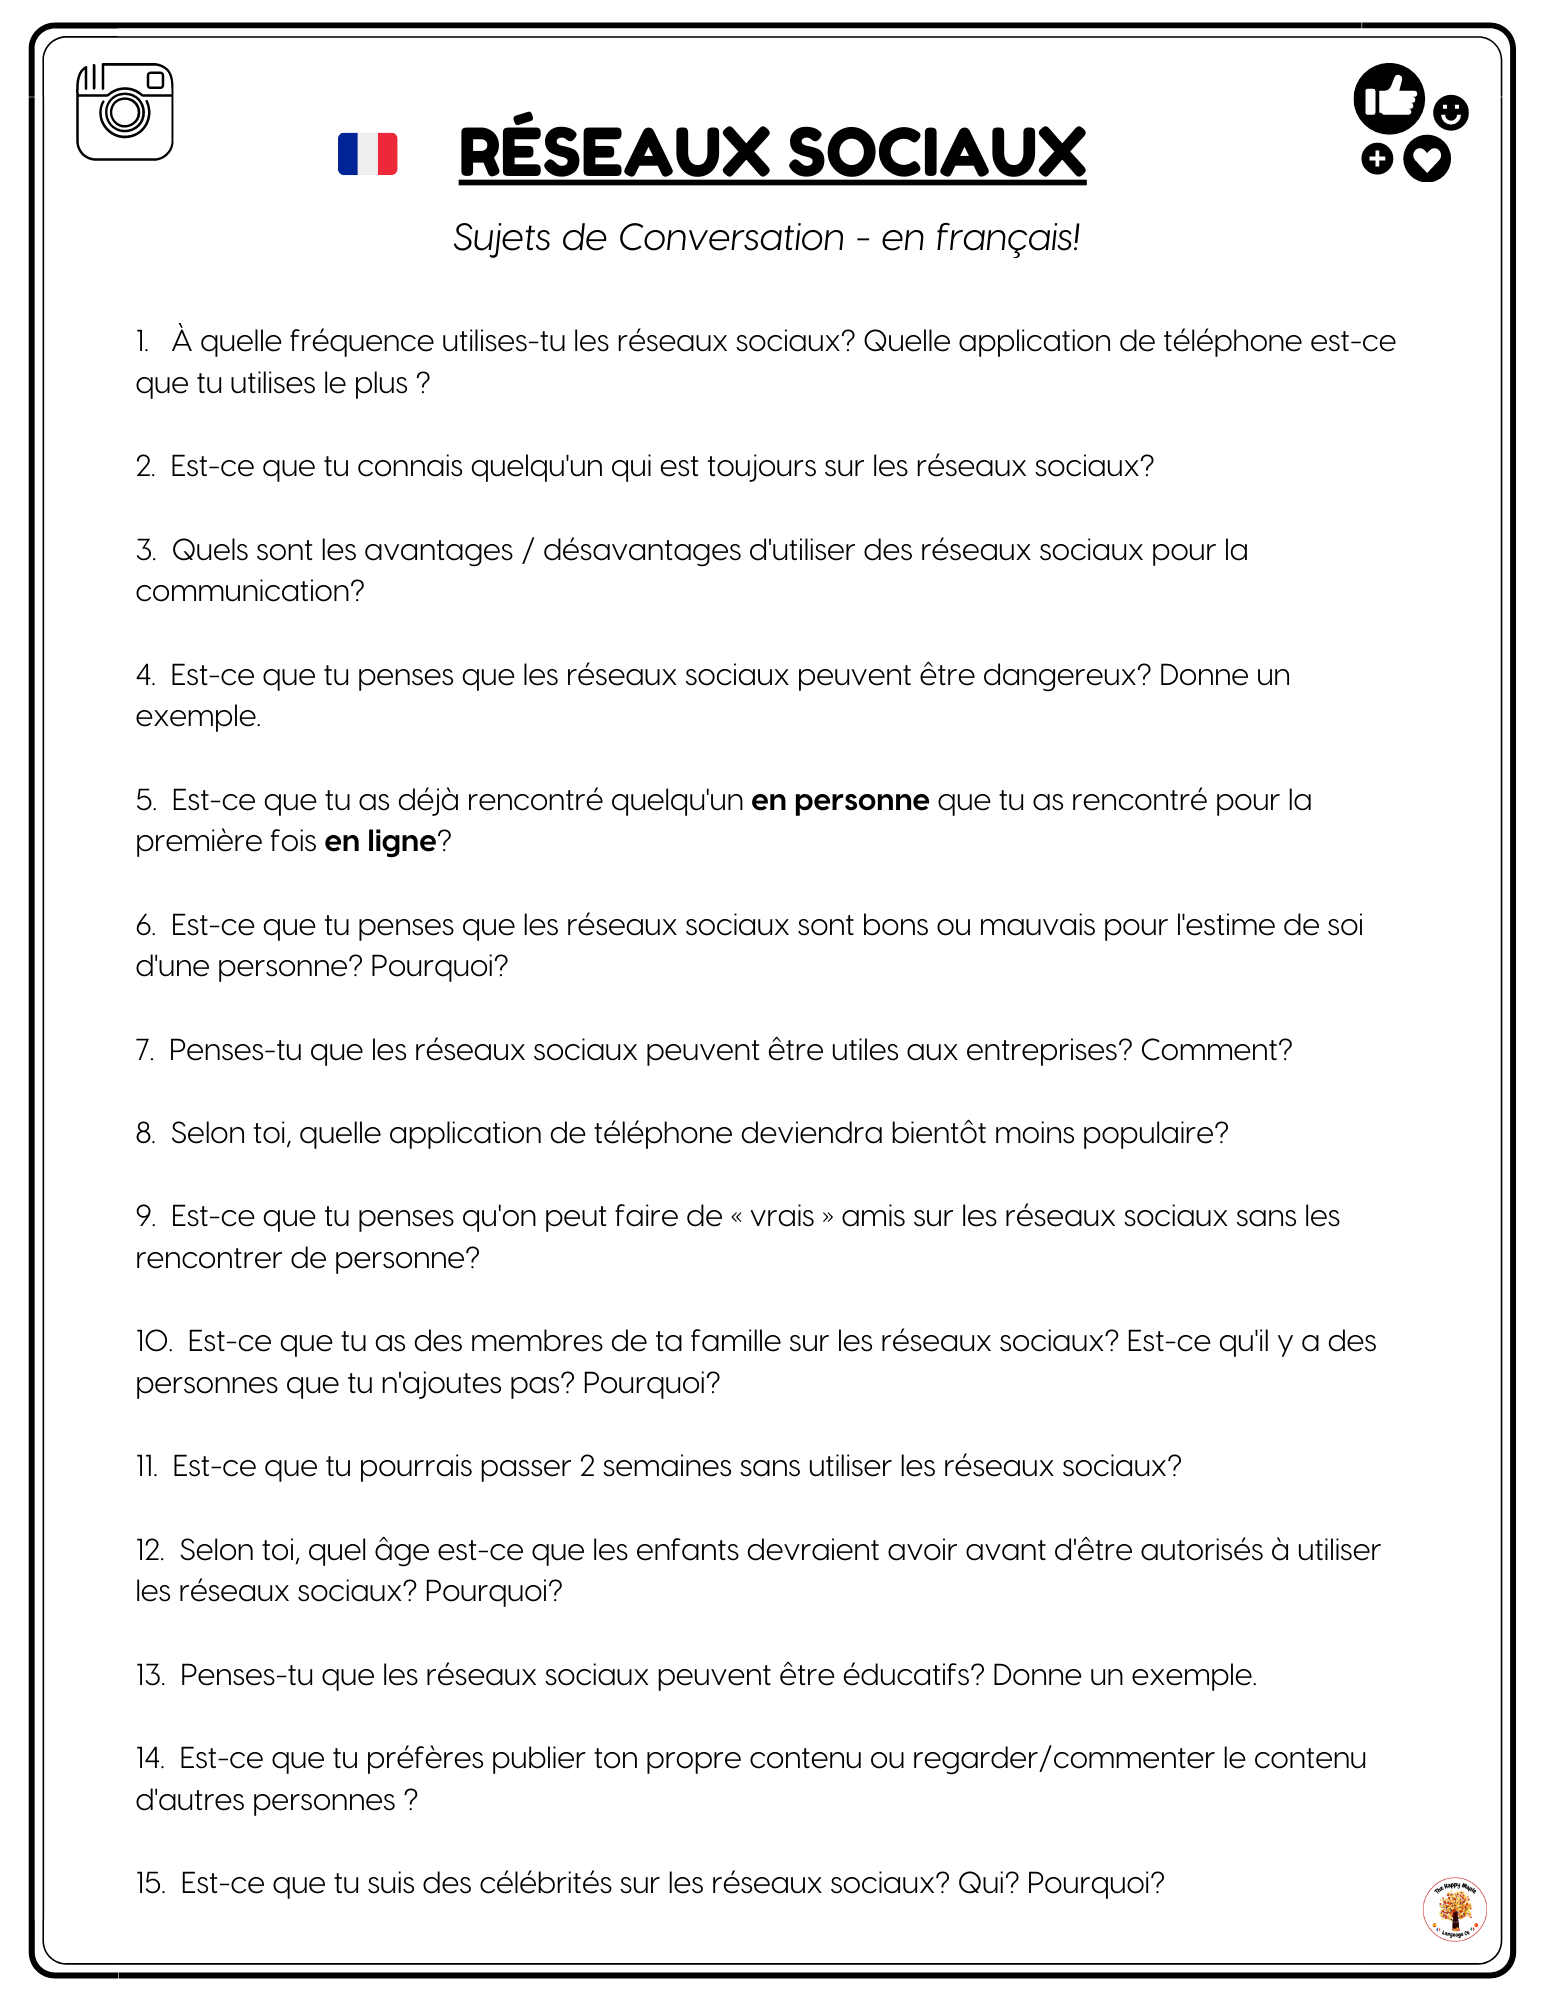 Free Printable French Discussion Questions about Social Media